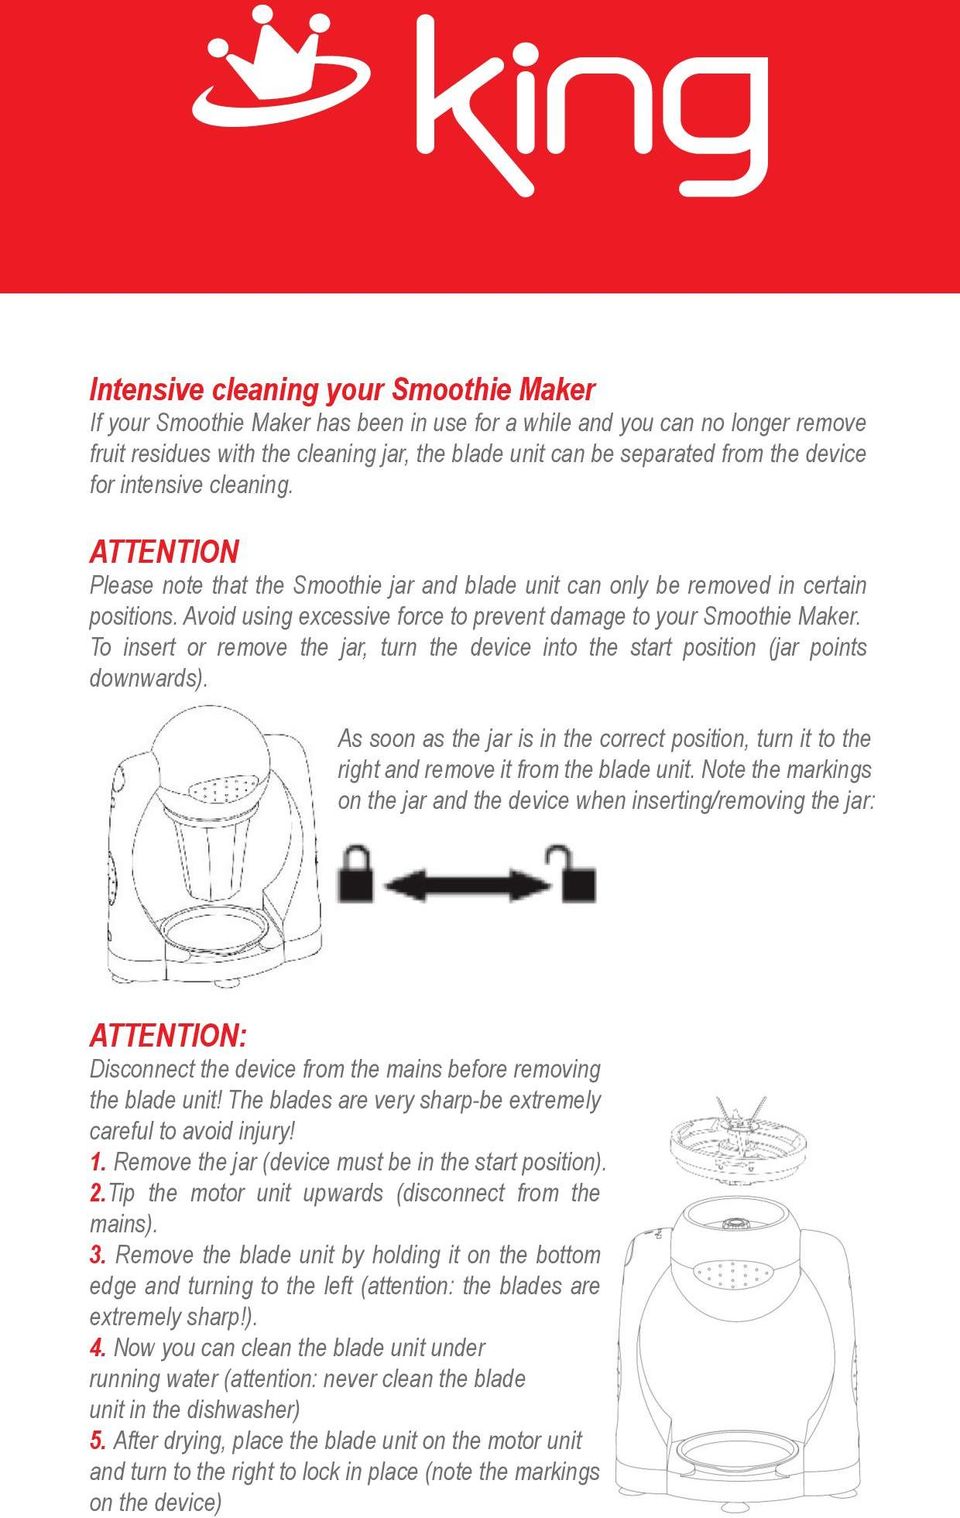 Avoid using excessive force to prevent damage to your Smoothie Maker. To insert or remove the jar, turn the device into the start position (jar points downwards).